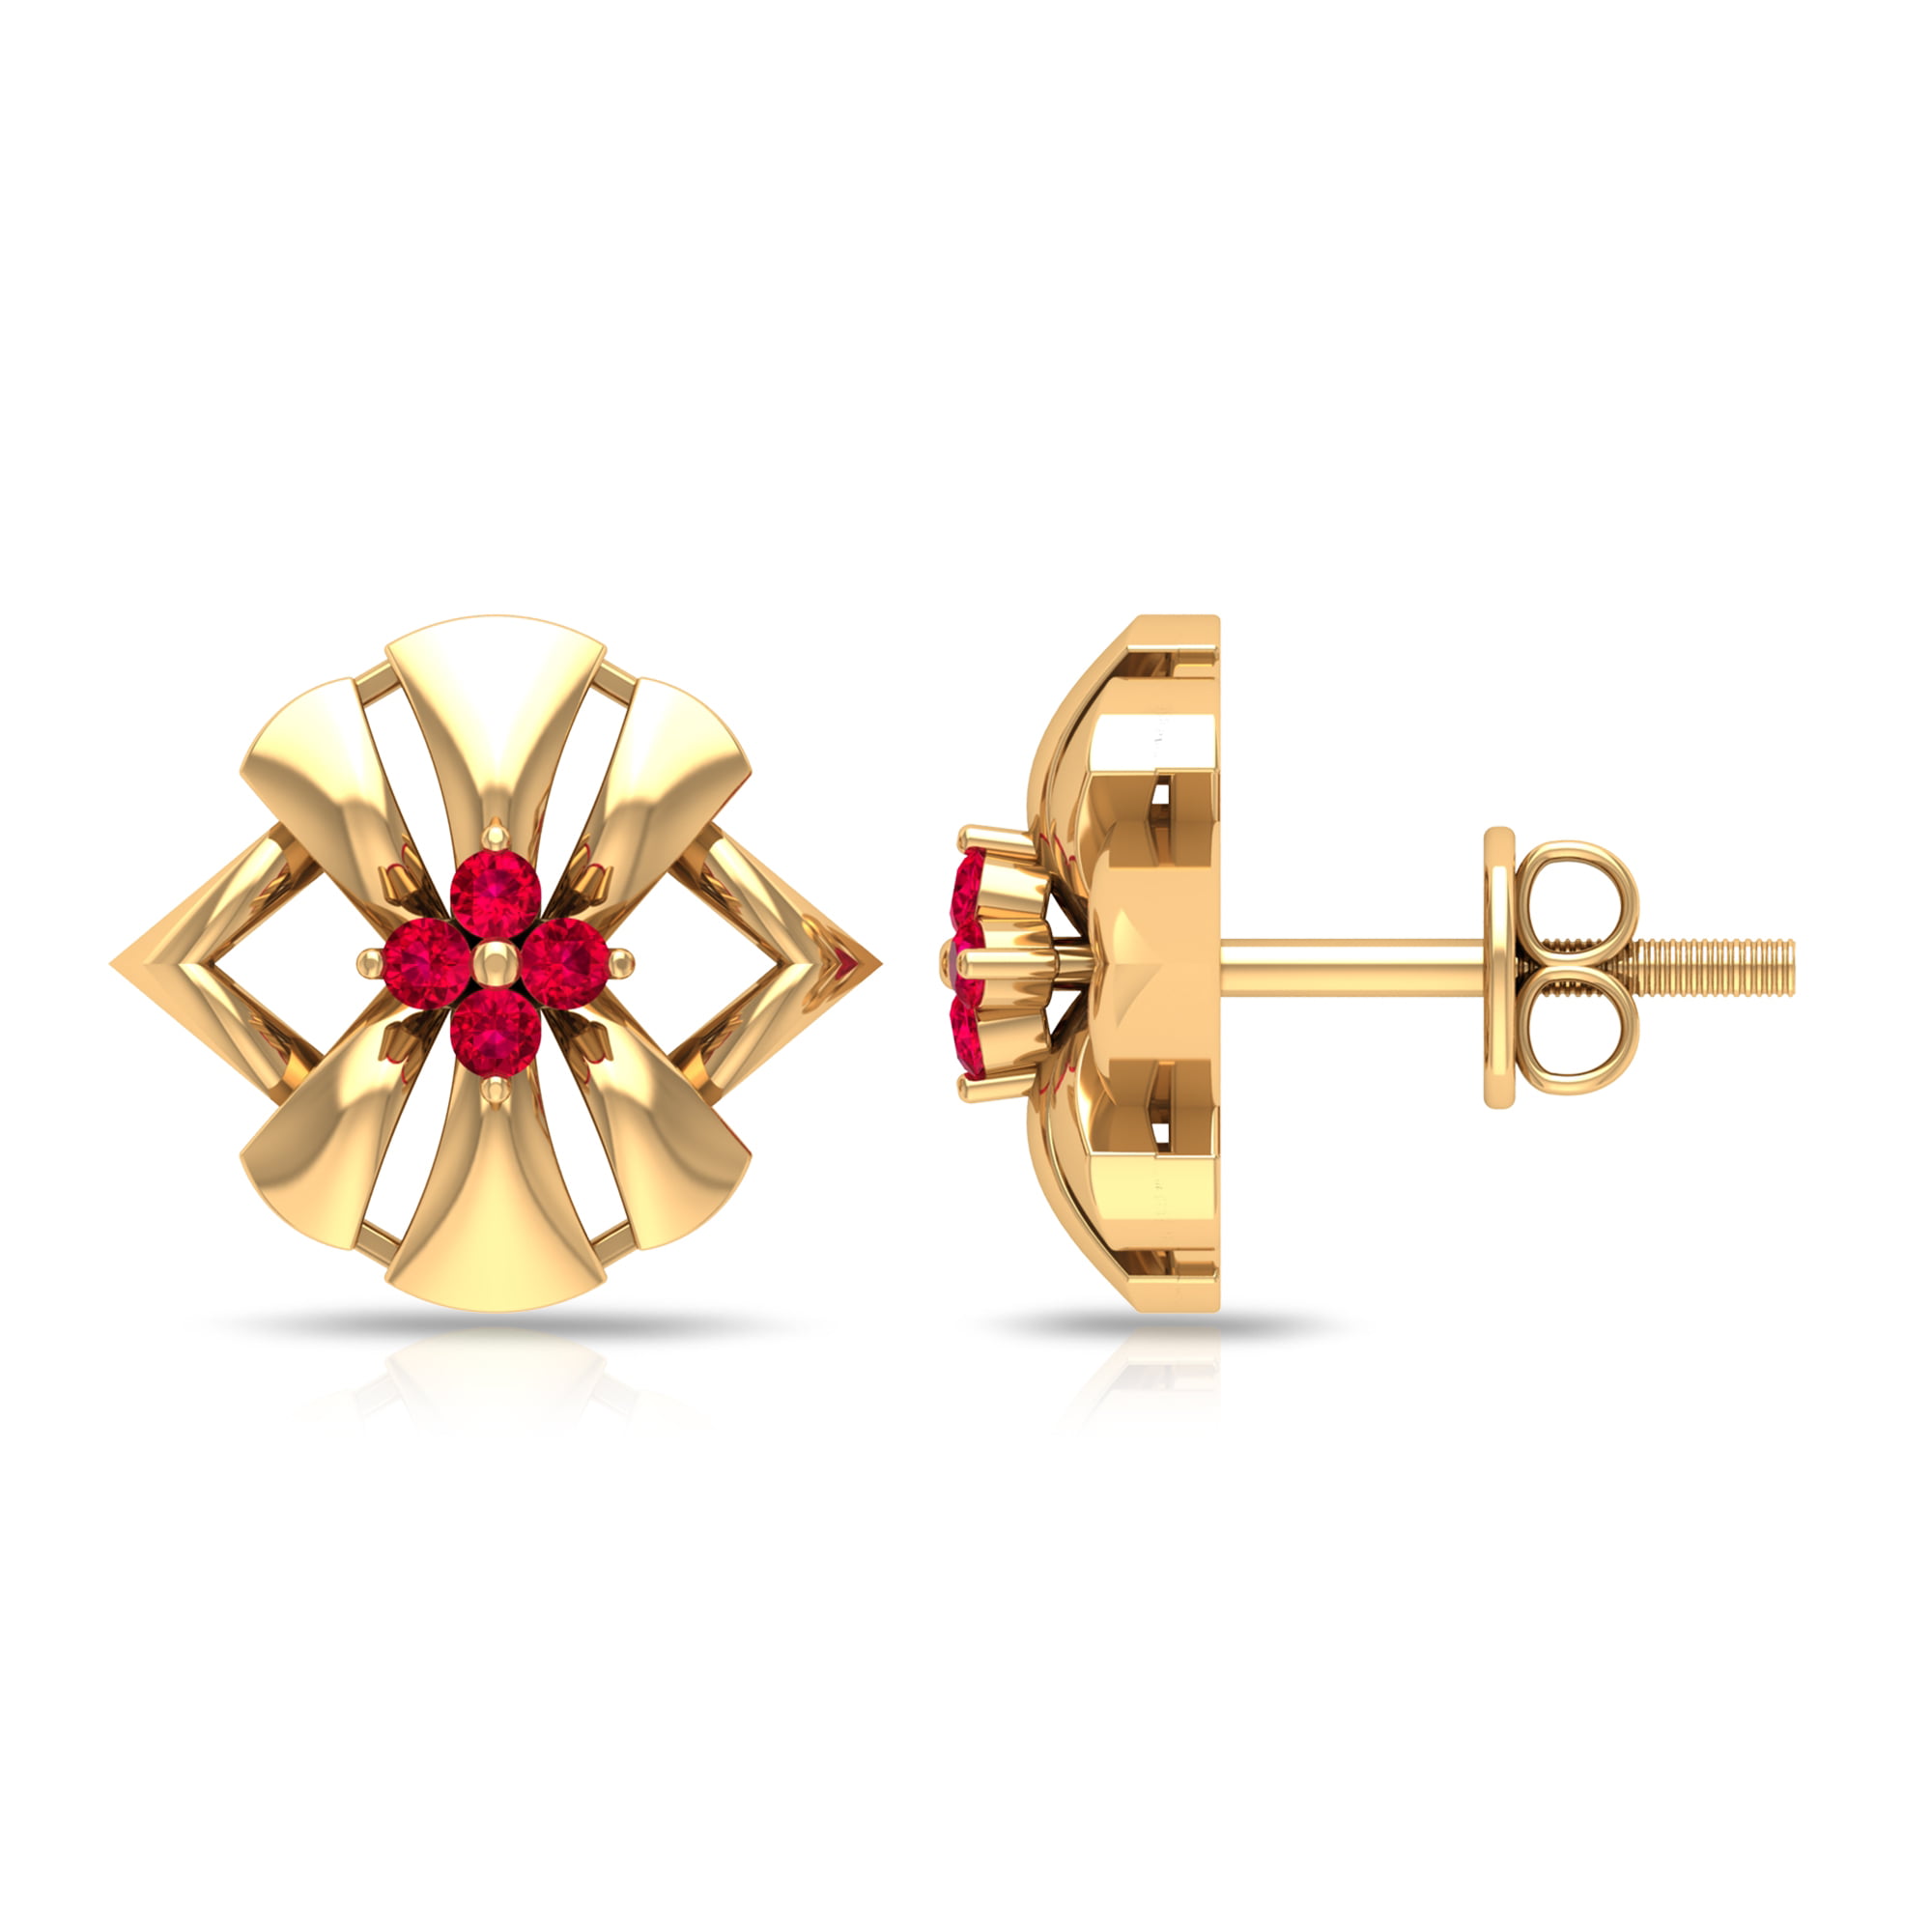 1Ct Round Cut Ruby & Diamond Cluster Flower Stud Earrings 14k Yellow Gold Finish